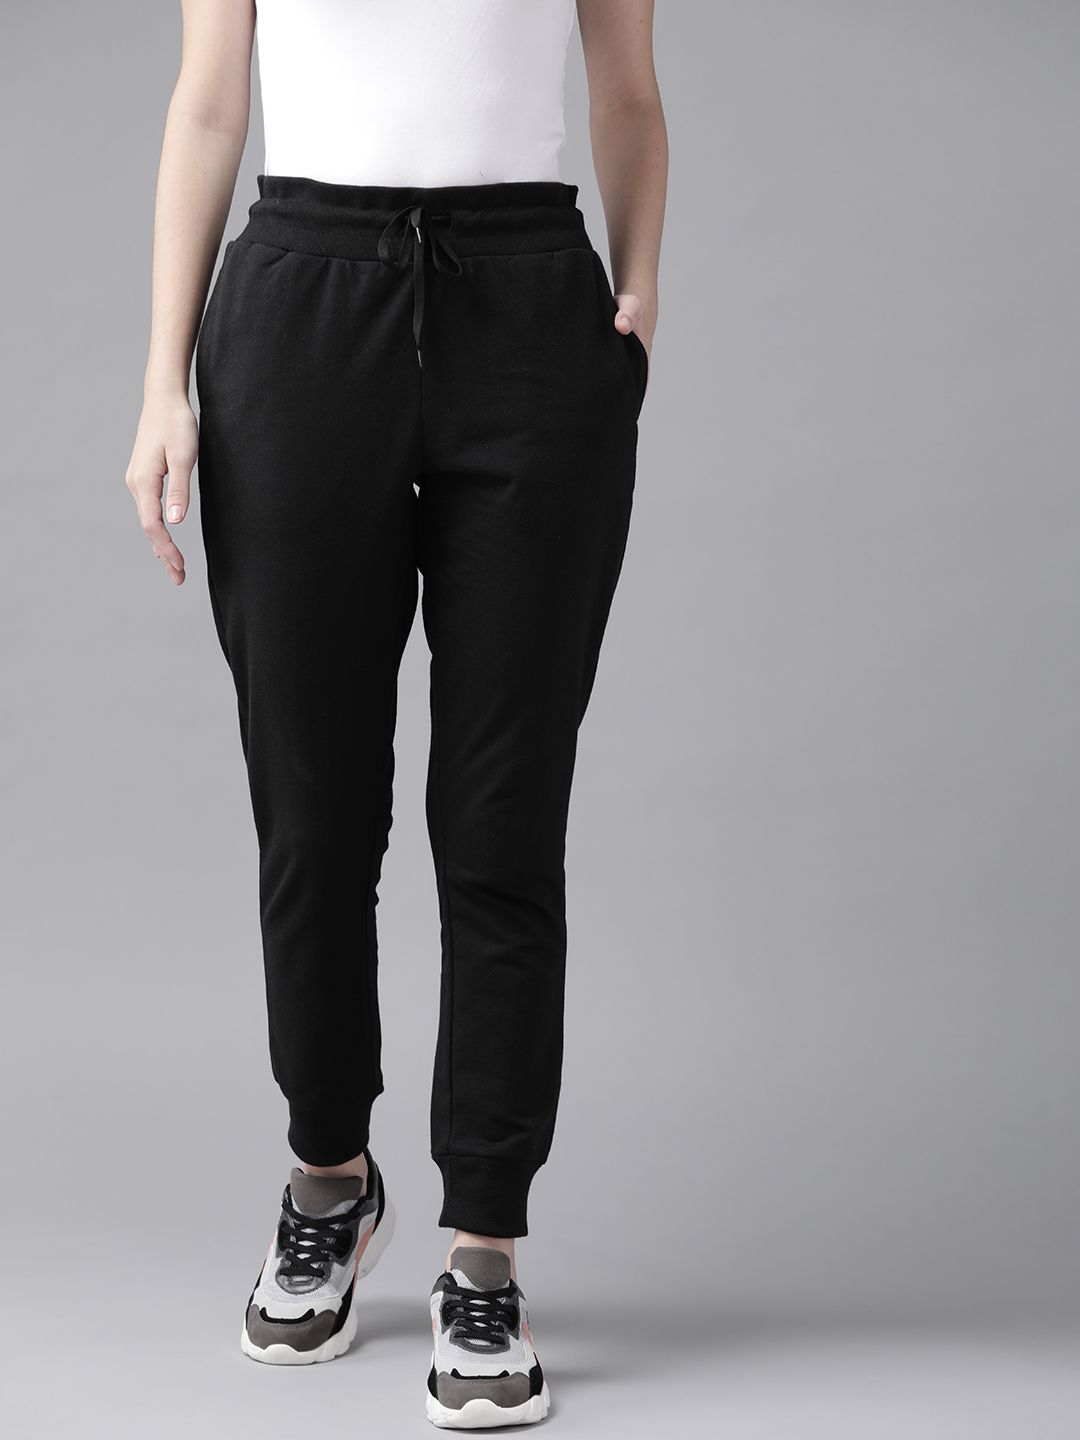 Roadster Women Black Solid Joggers Price in India